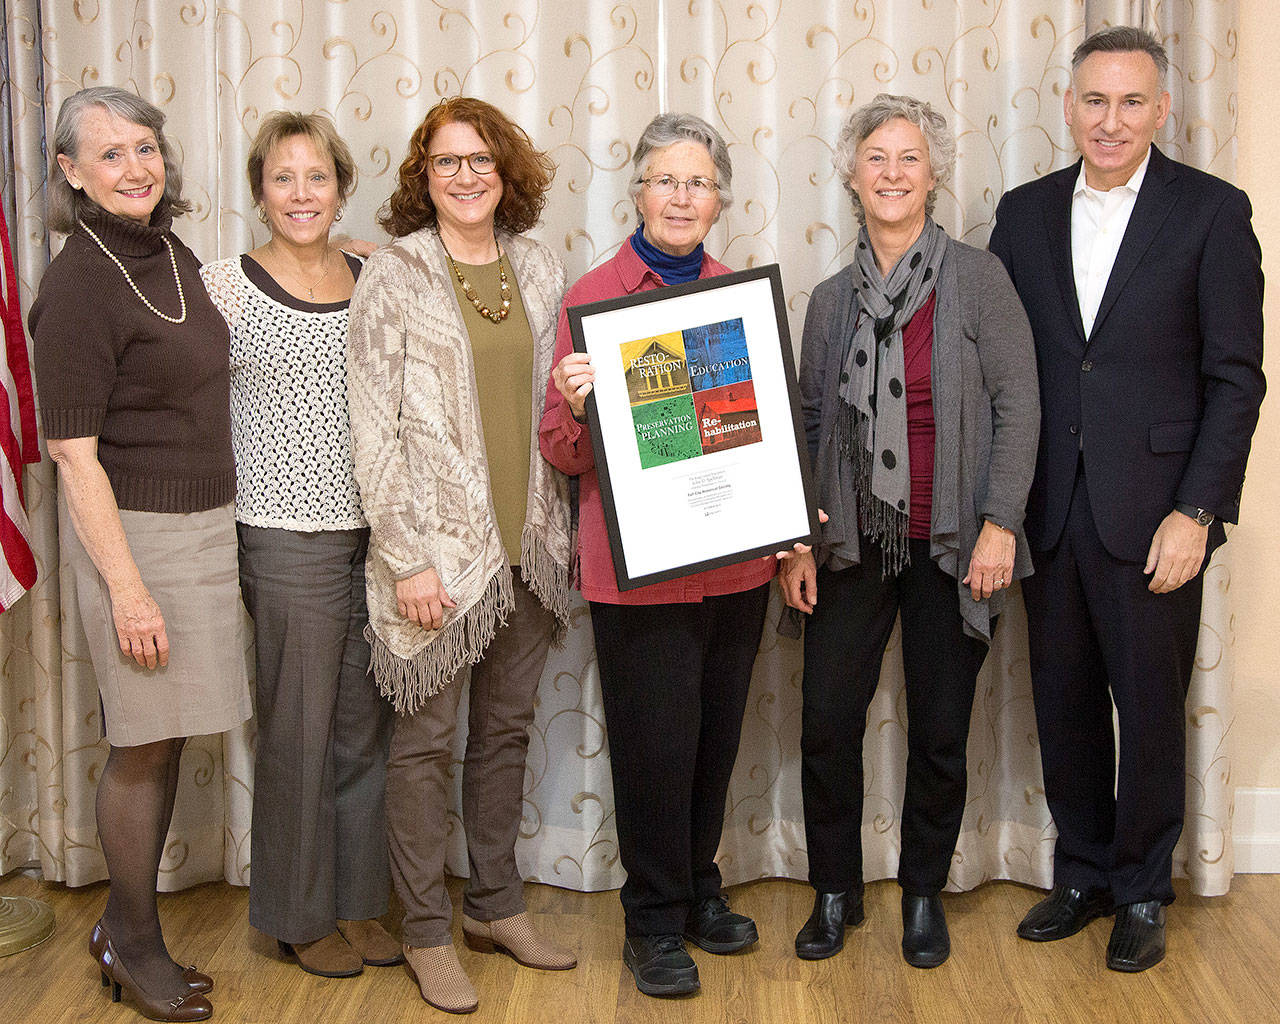 Recognized for their work in educating the public about Fall City’s history, the Fall City Historical Society’s board, from left, Donna Driver-Kummen, Paula Spence, Anne Neilson, Ruth Pickering and Cindy Parks accept the Spellman award from King County Executive Dow Constantine. Leanne Adcox, not pictured, is also on the board. (King County photo by Ned Ahrens)